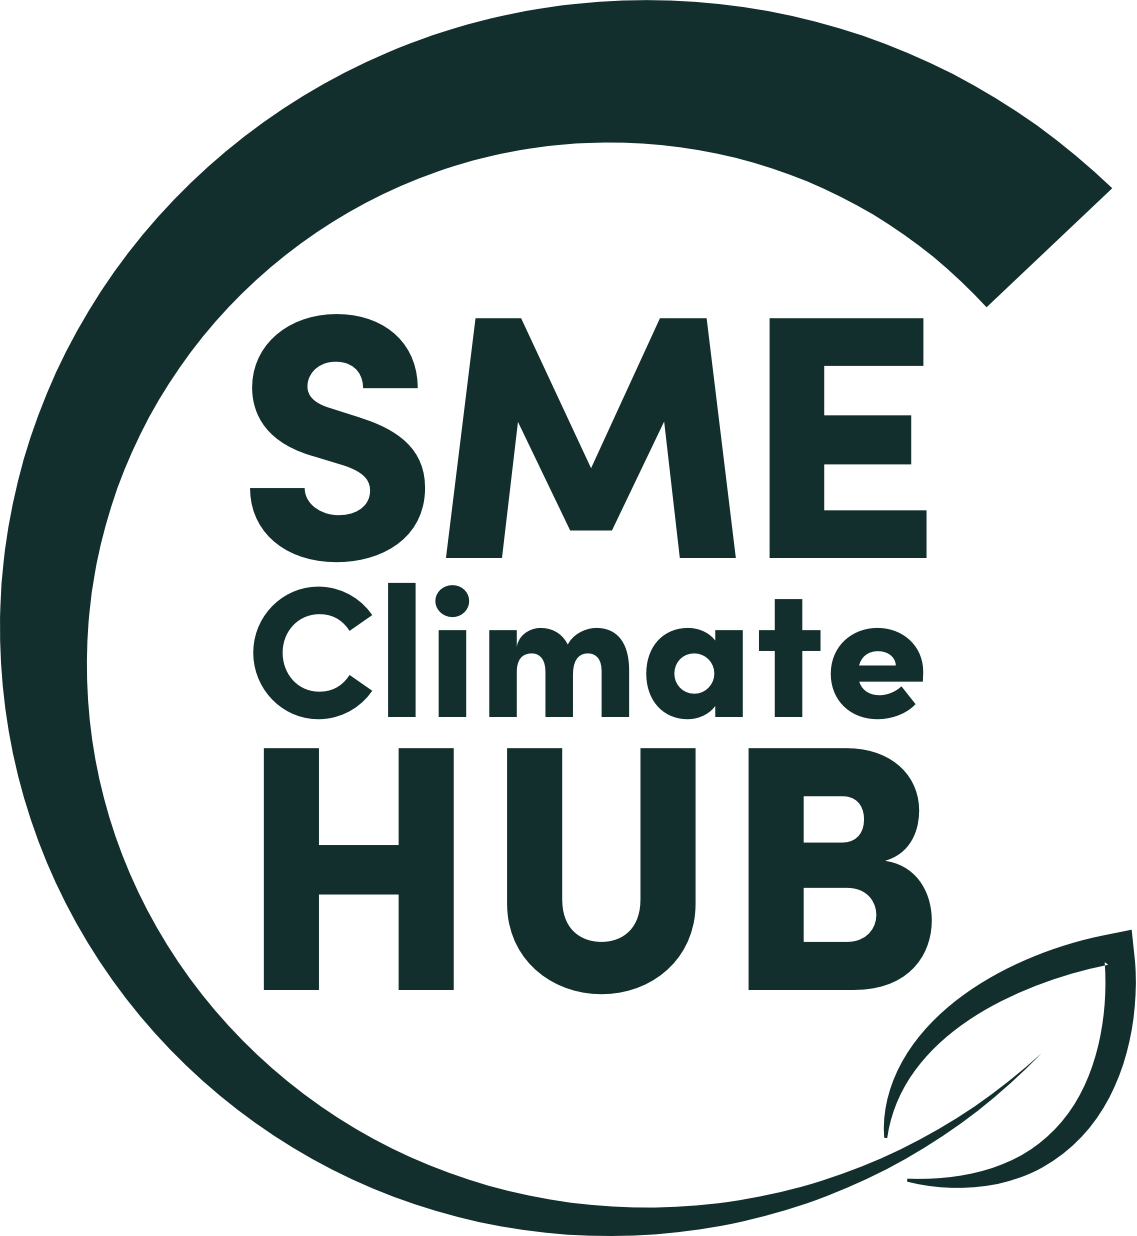 We are proud members of the SME Climate Hub. As an Impact Communications Agency we believe it's important to look after our planet